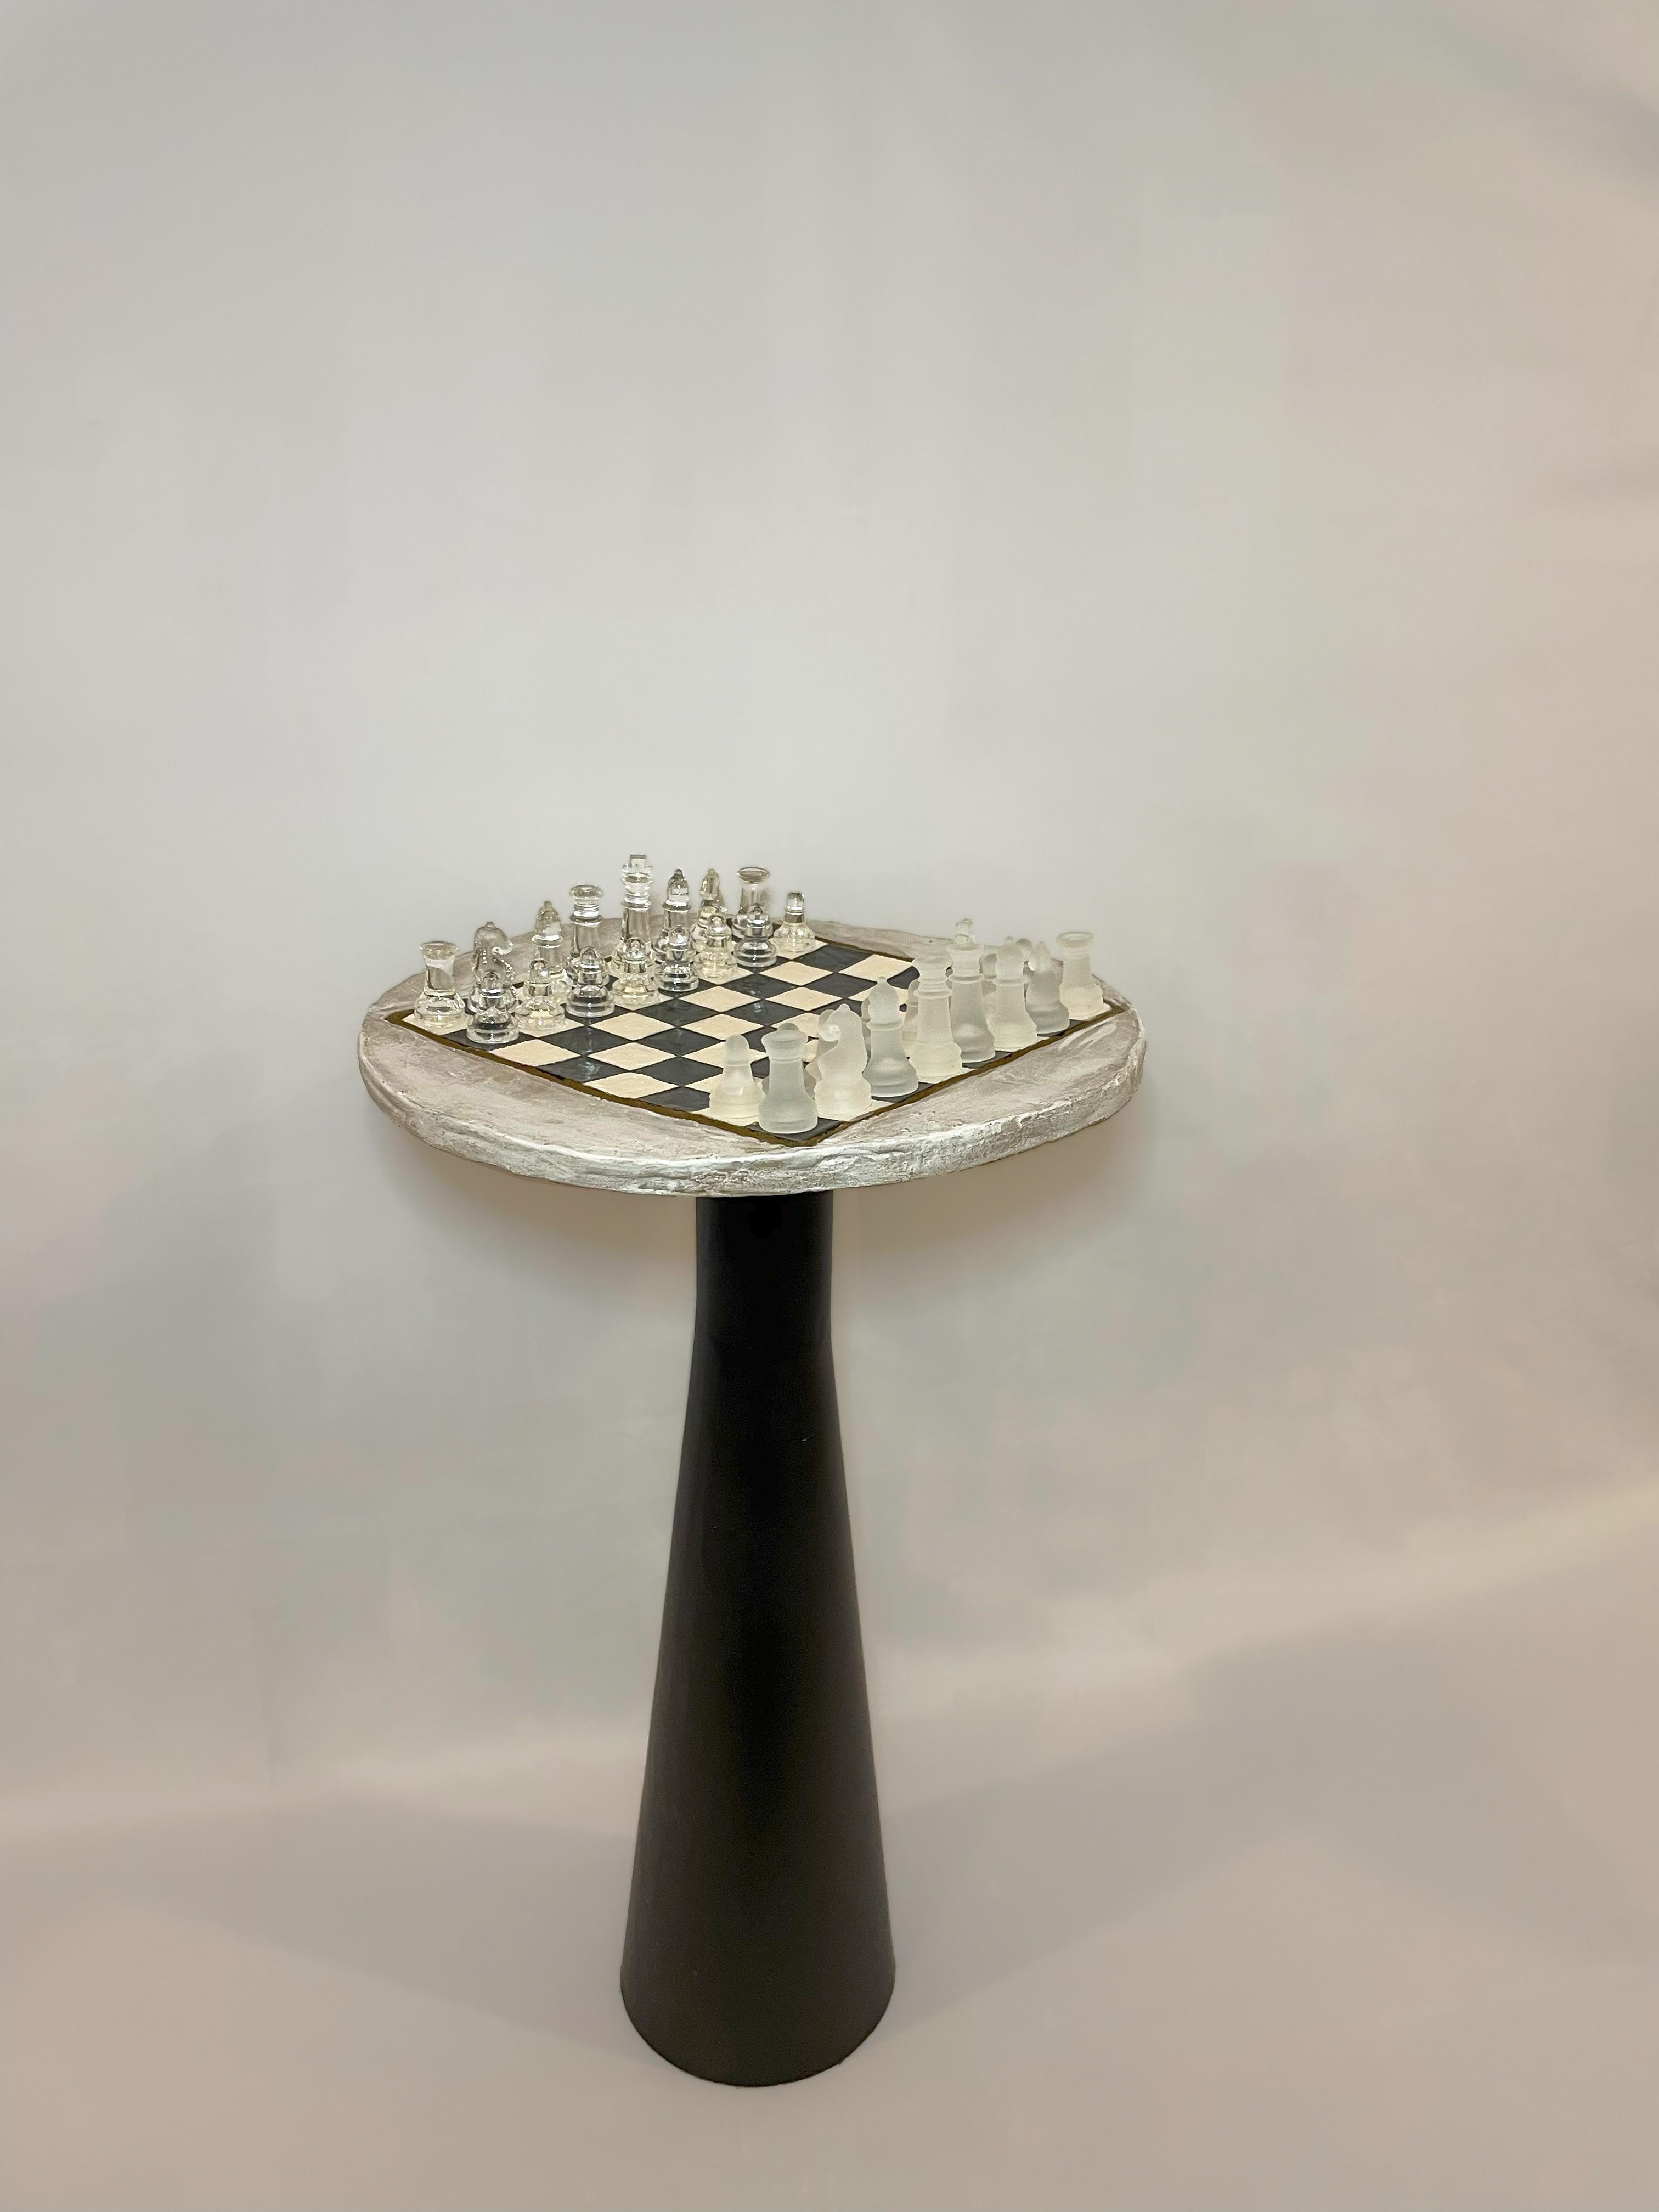 Hand-Crafted Ceramic and Metal Chess Table